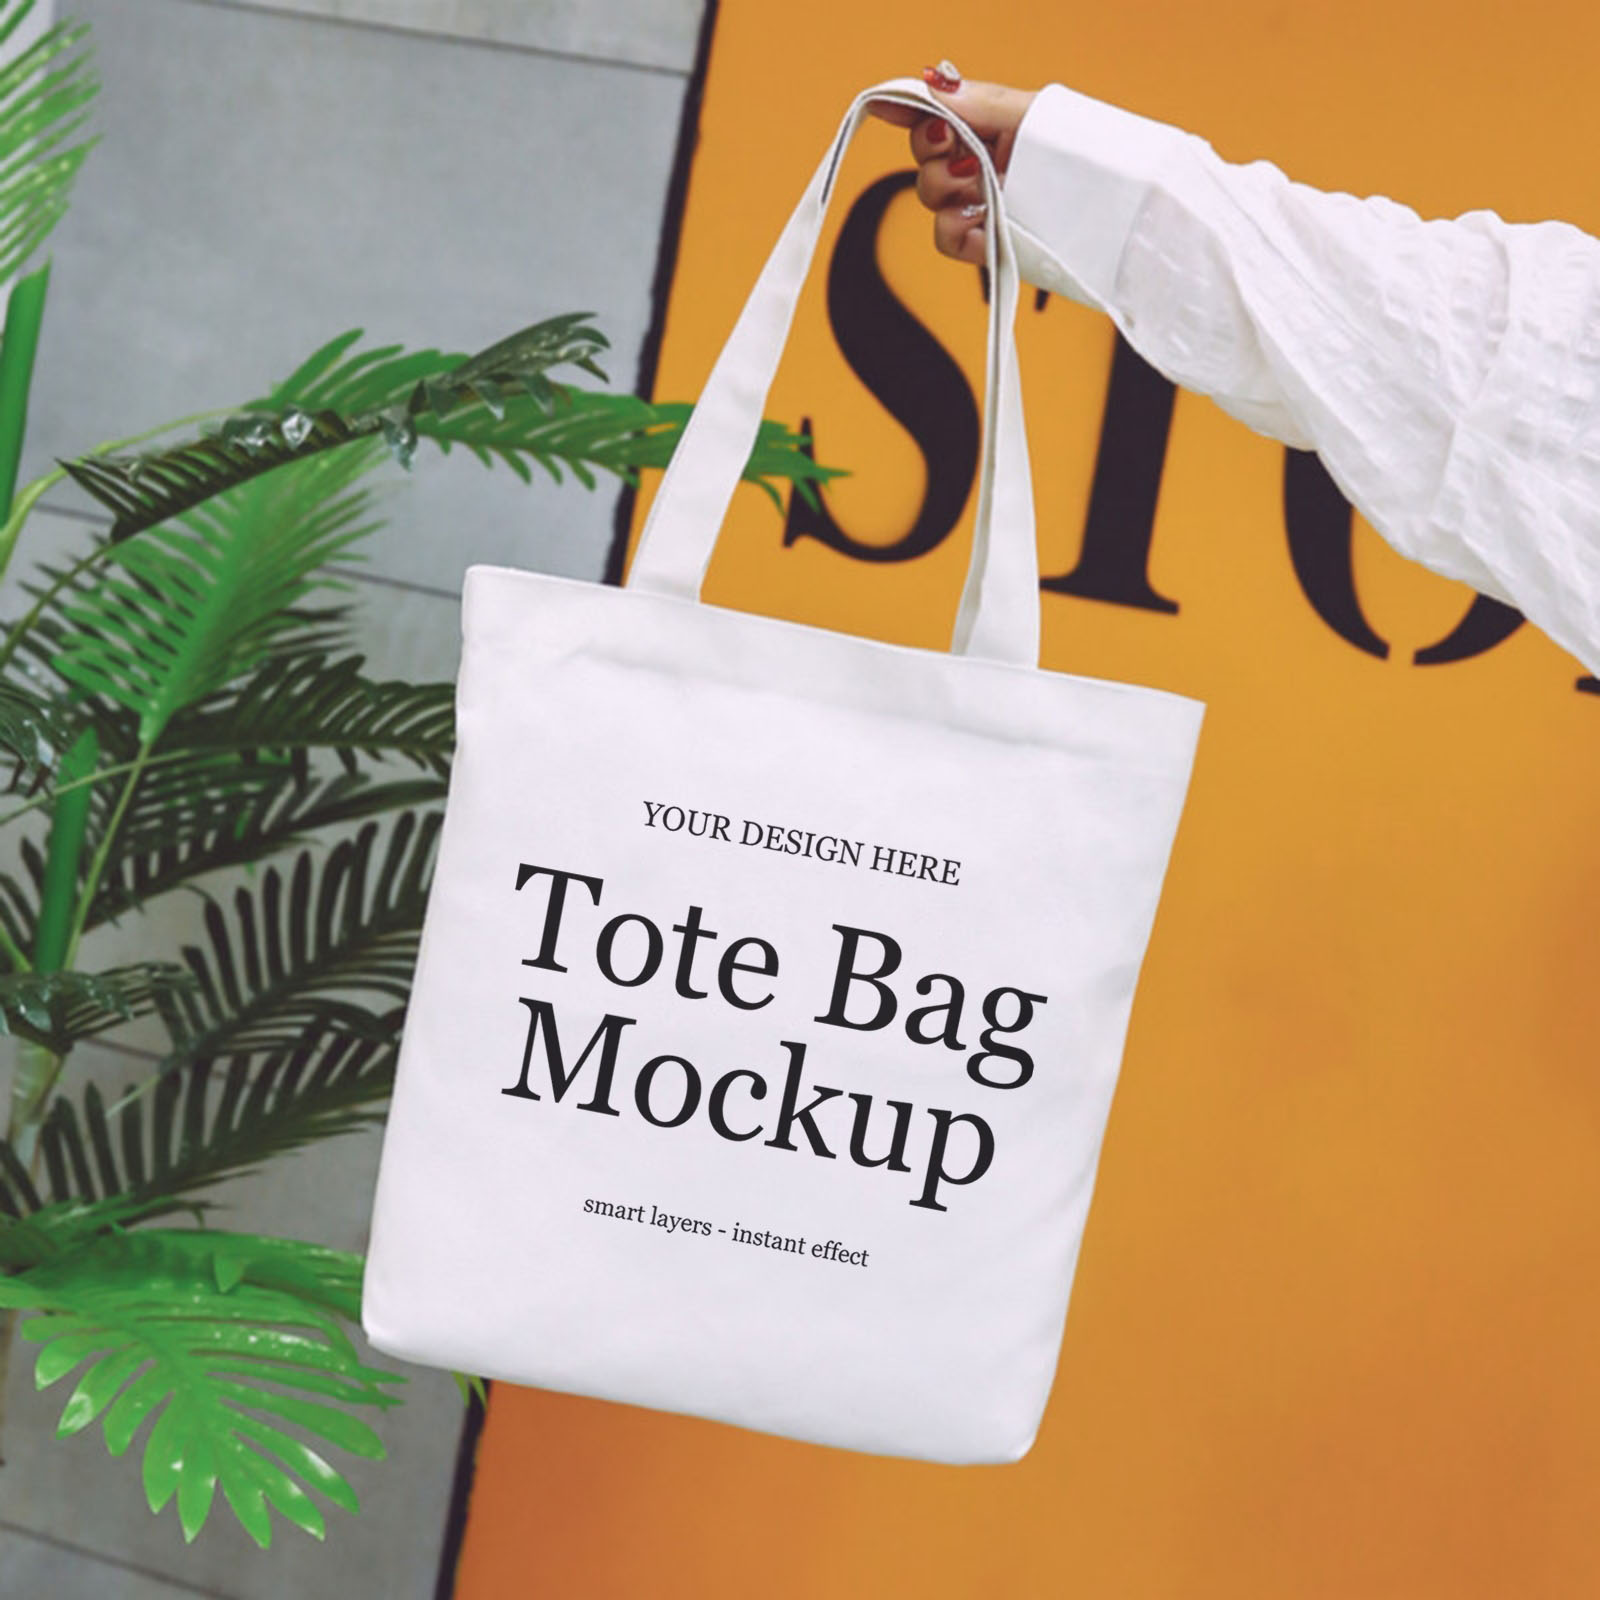 Free PSD White Canvas Tote Bag Mockup Download 57 by diosvolt on DeviantArt